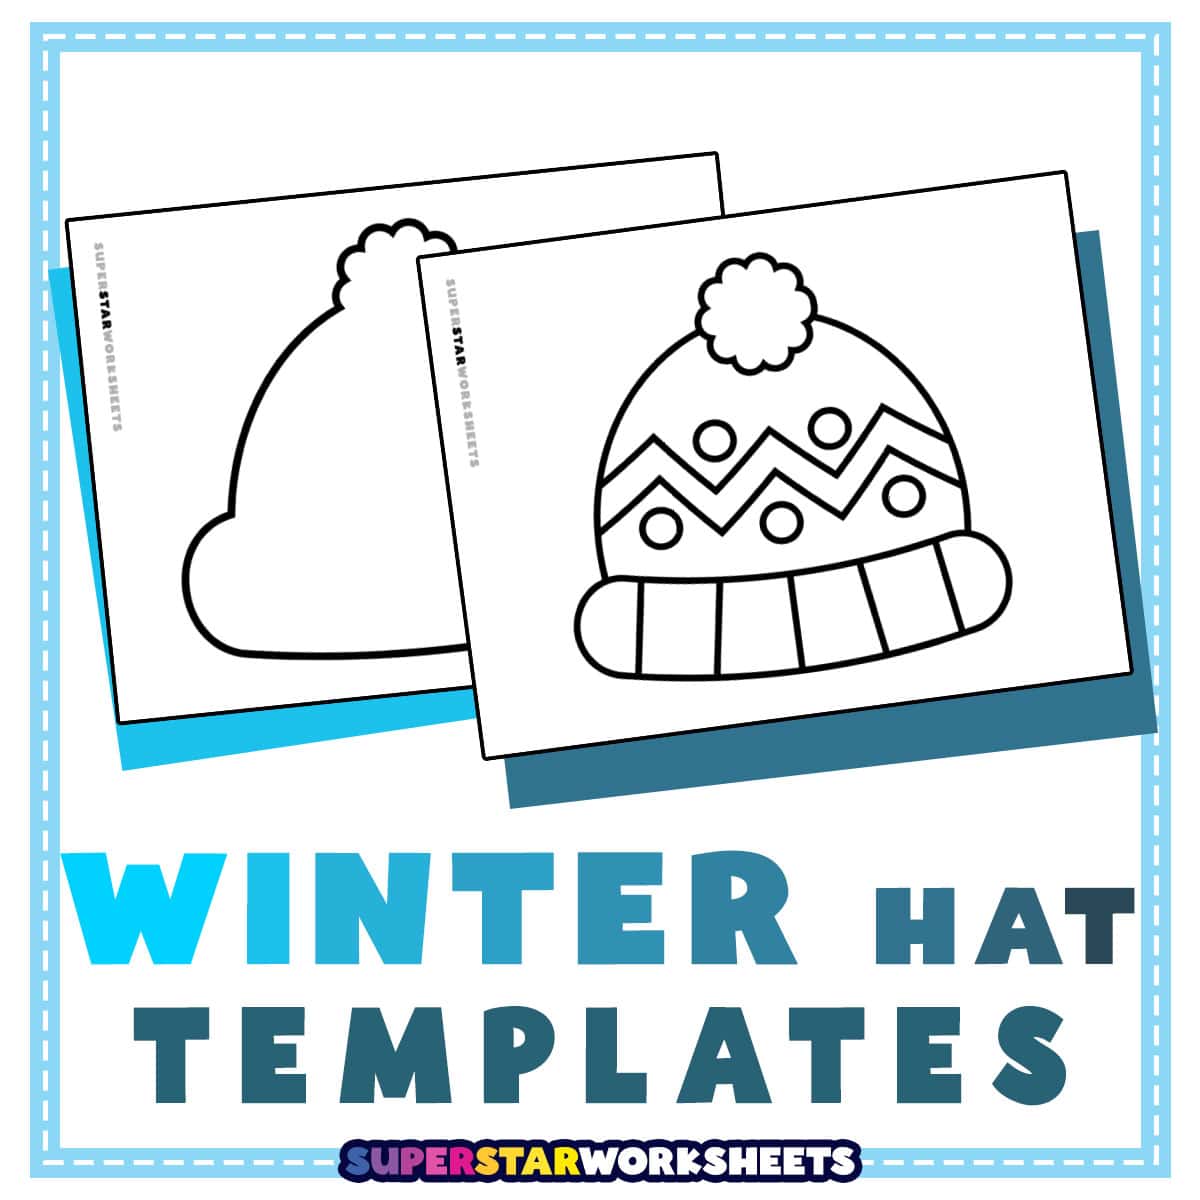 Graphic showing two winter hat templates.